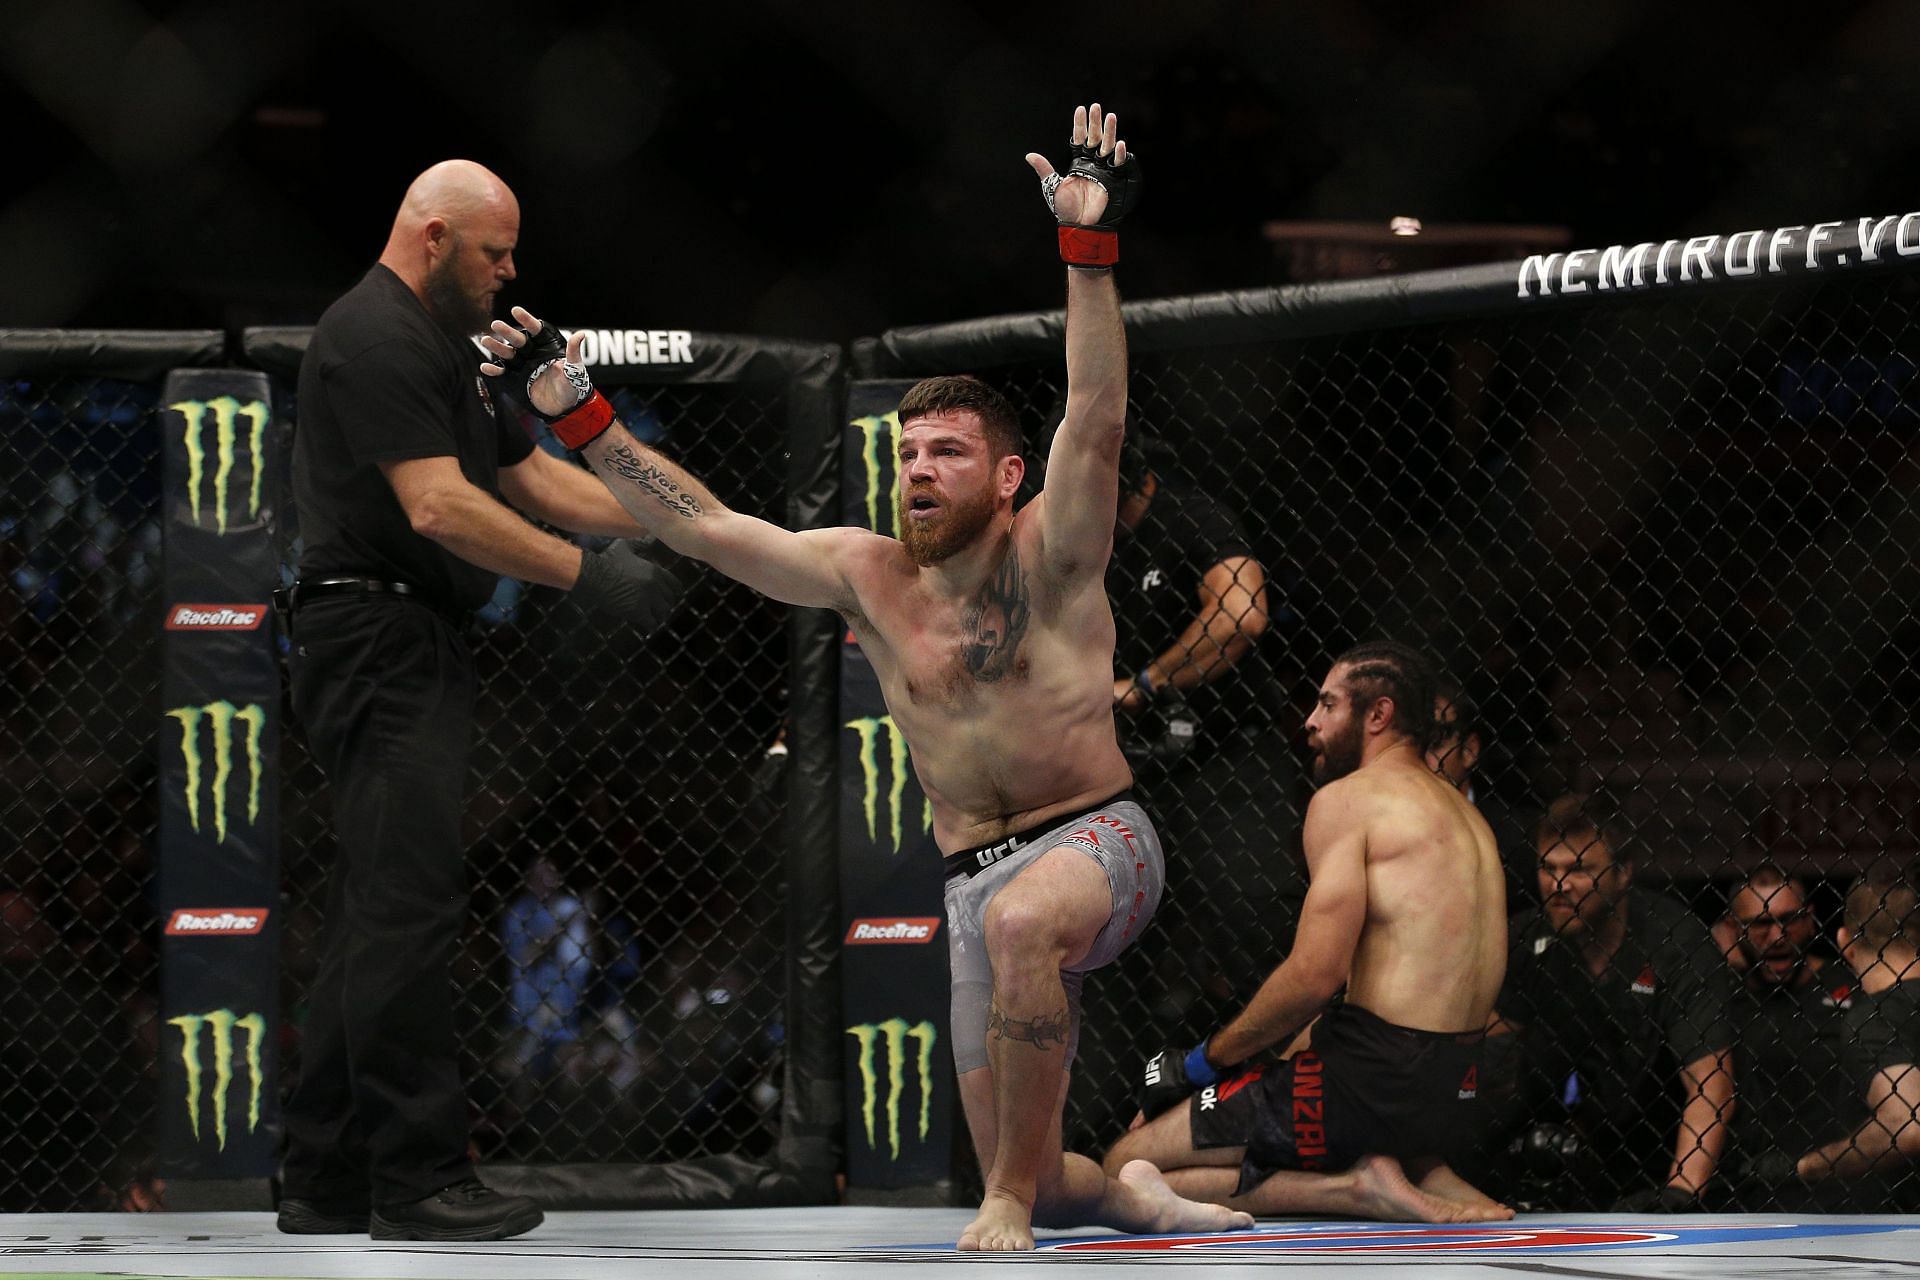 Jim Miller will compete in his 43rd octagon bout this weekend